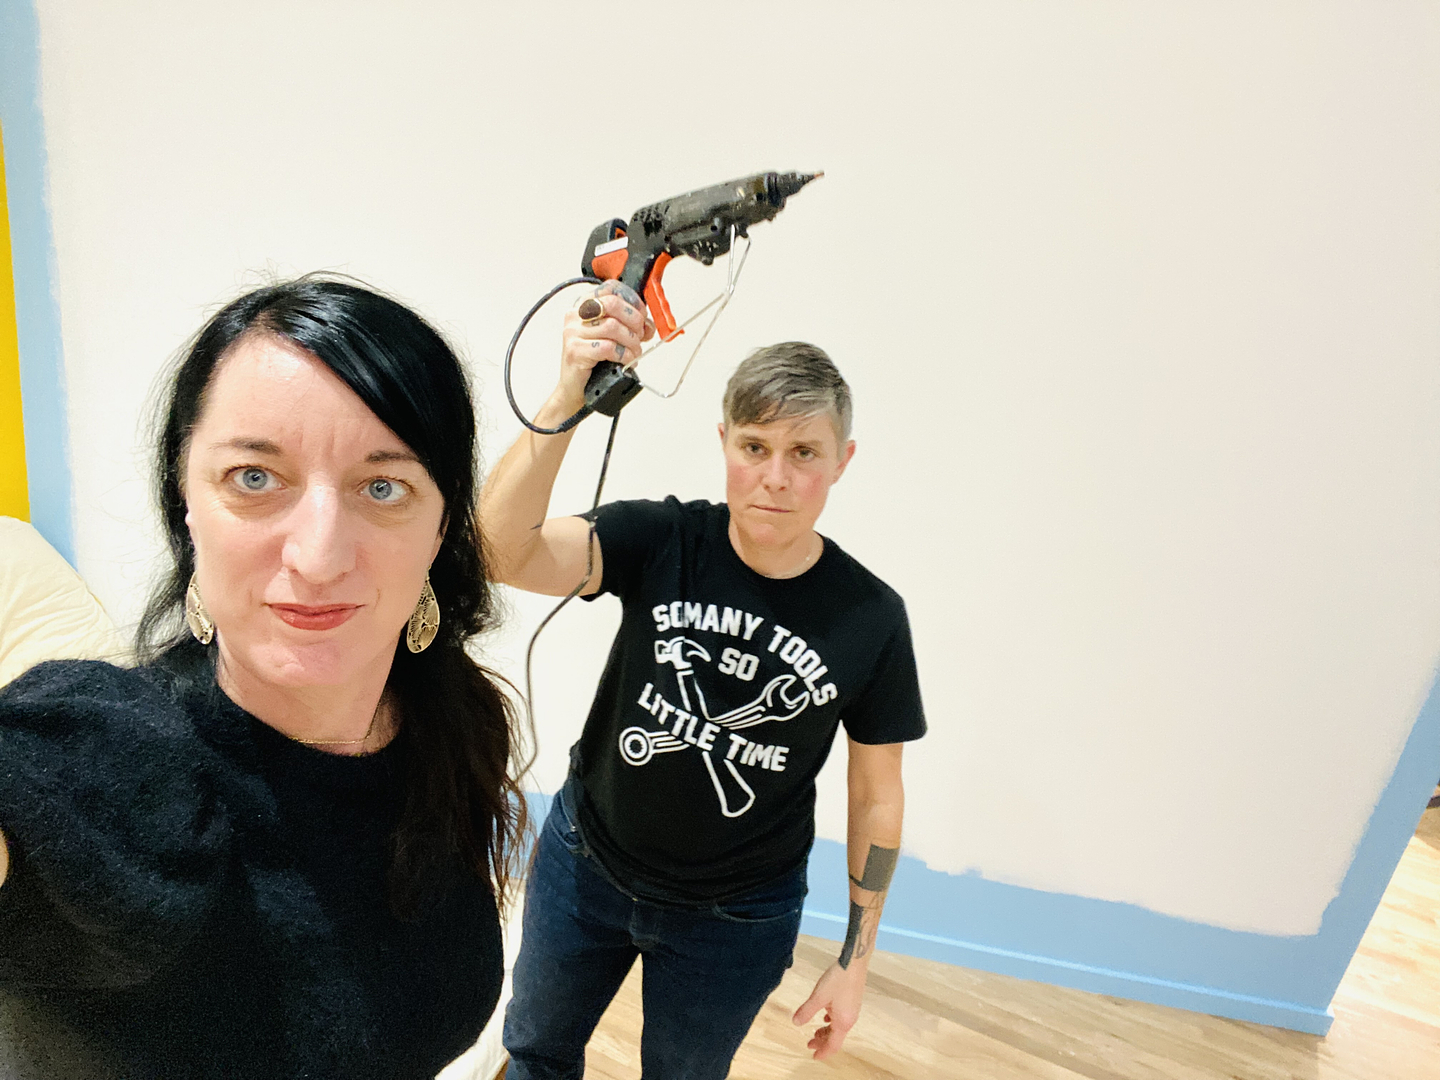 A selfie of Sheilah and Dani ReStack standing in front of a white wall that is in the process of being painted blue. Sheilah wears a black textured top and gold earrings. Dani, who is dressed in blue jeans and a black graphic t-shirt that reads "so many tools so little time," stands behind her while holding an industrial hot glue gun overhead. 